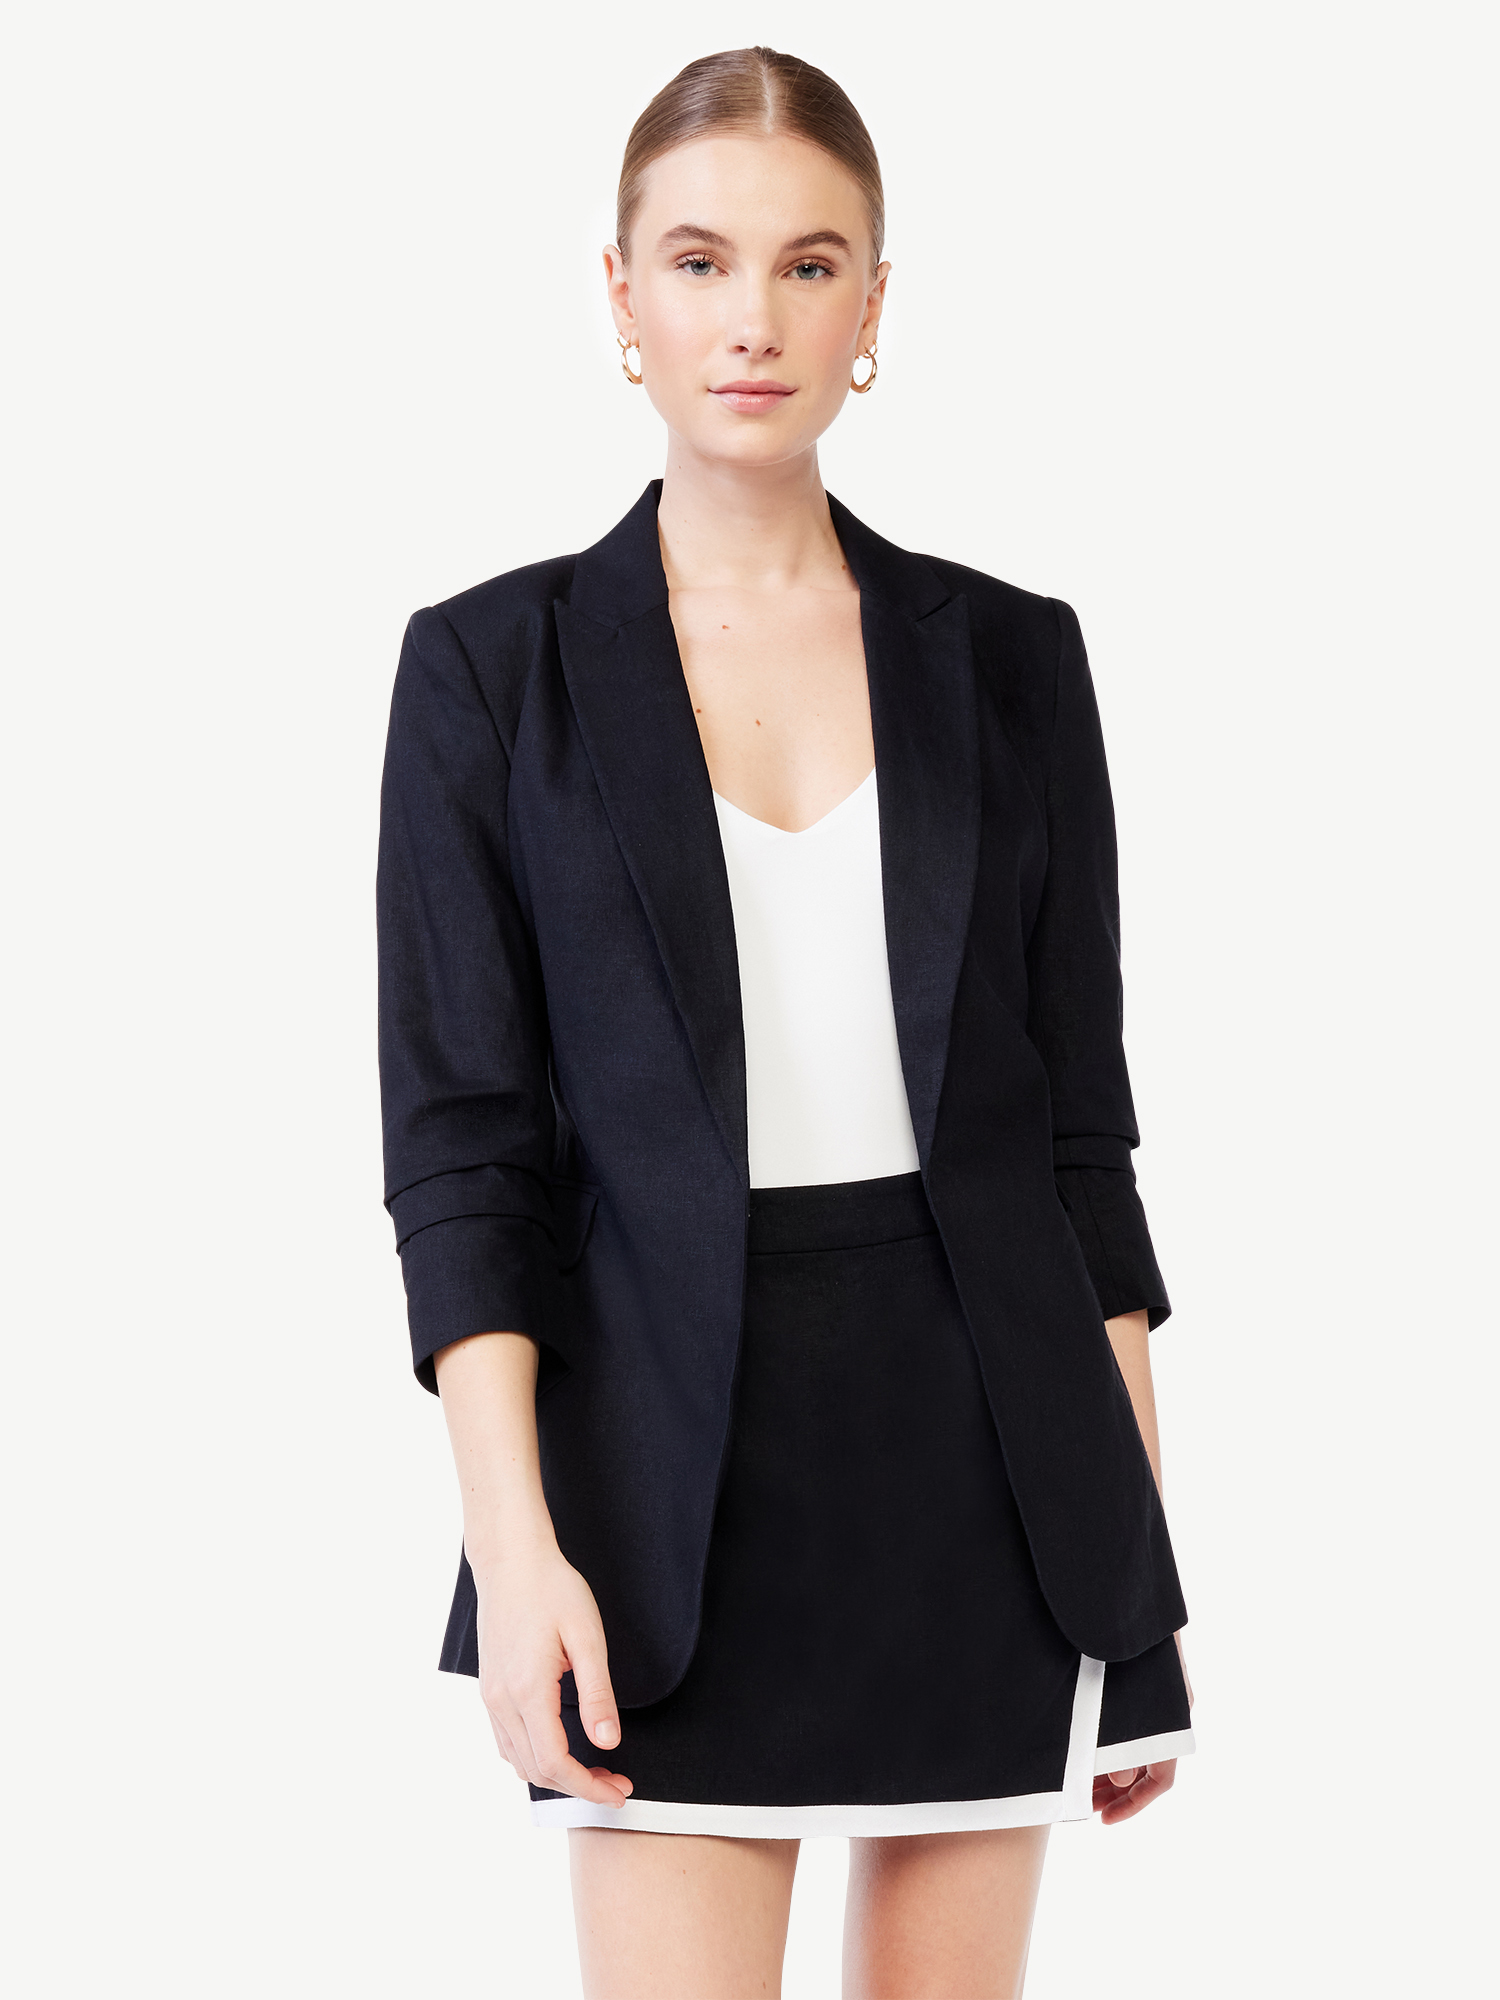 Scoop Women's Linen-Blend Open Front Blazer with Tie Back and 3/4 Scrunch Sleeves - image 1 of 5